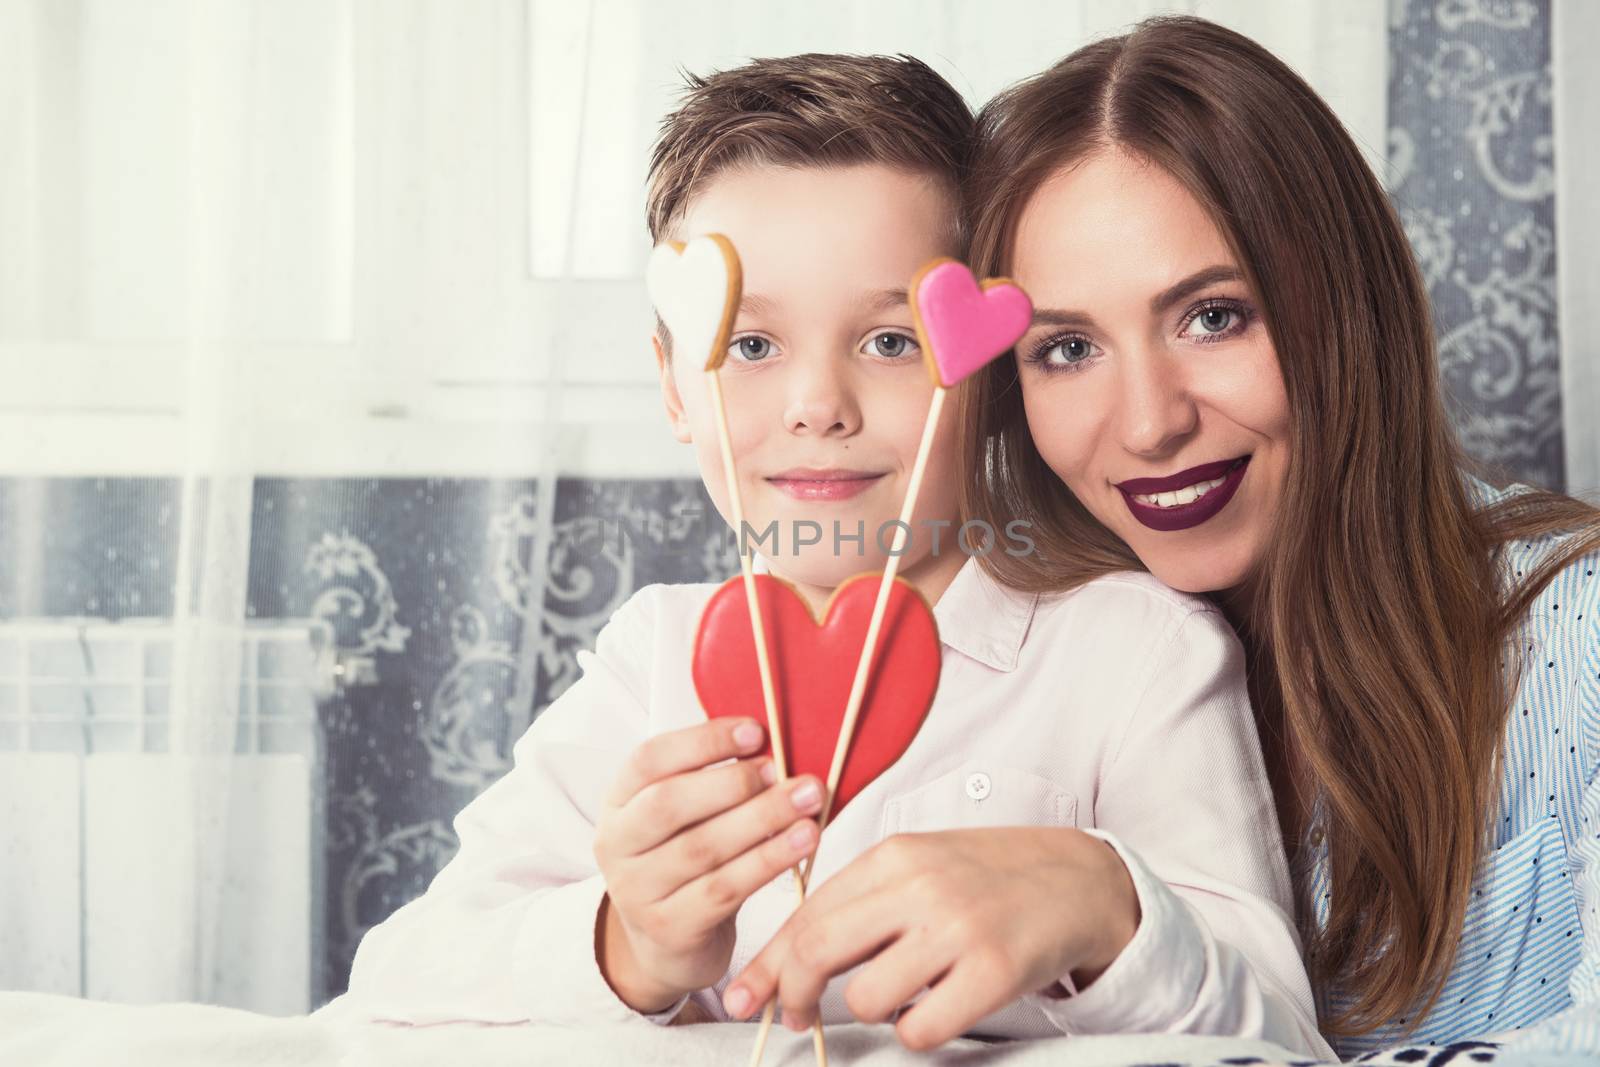 Happy Valentines Day or Mother day. Young boy spend time with his mum and celebrate with gingerbread heart cookies on a stick.